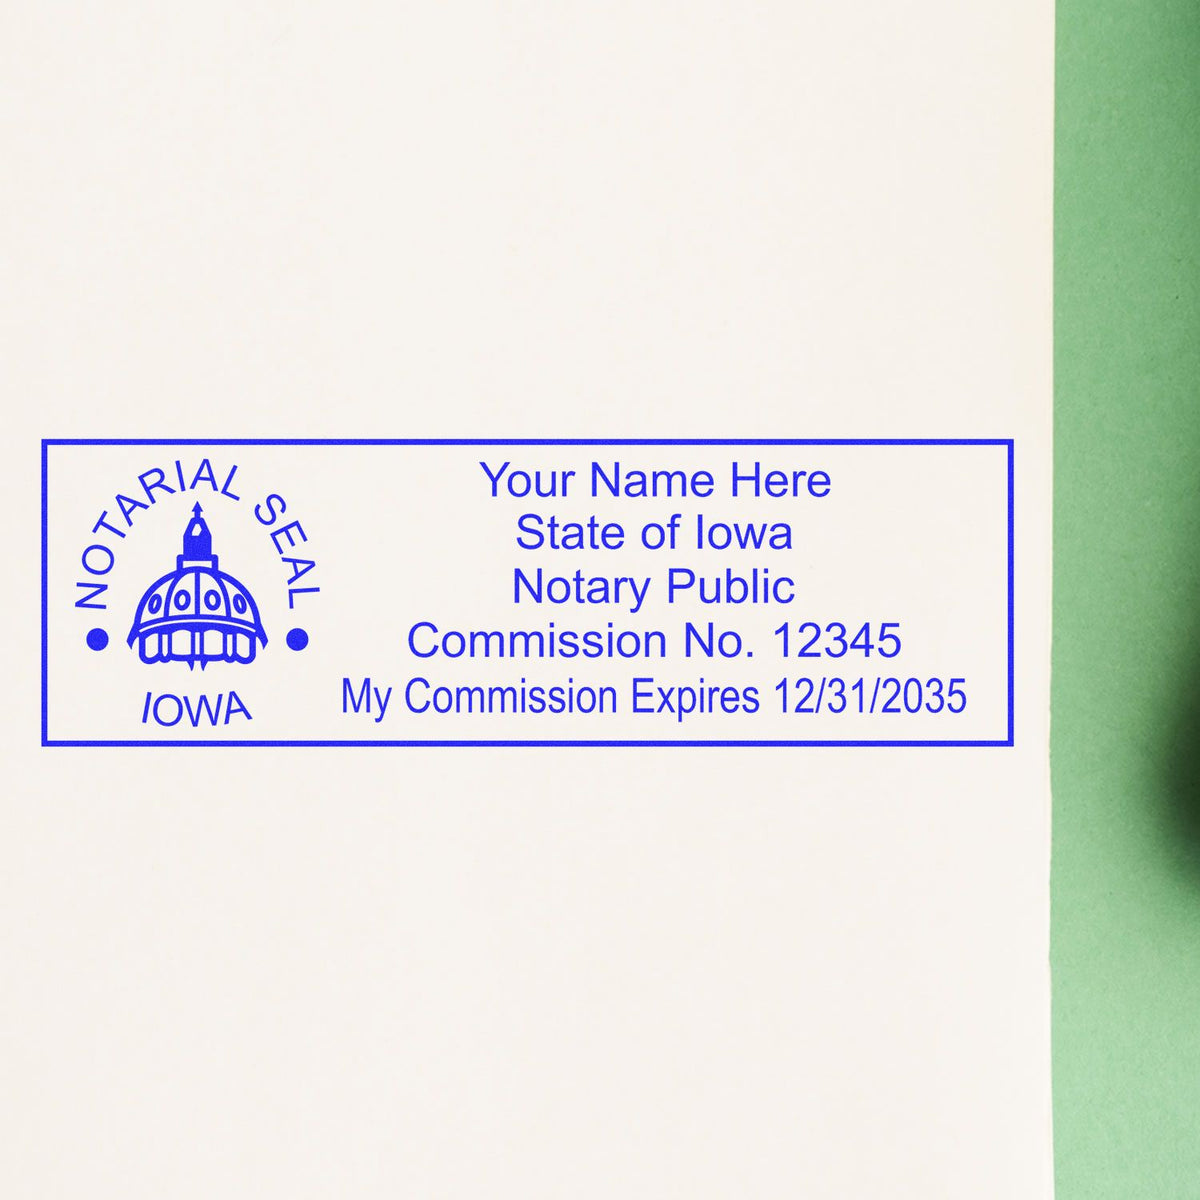 An alternative view of the Super Slim Iowa Notary Public Stamp stamped on a sheet of paper showing the image in use